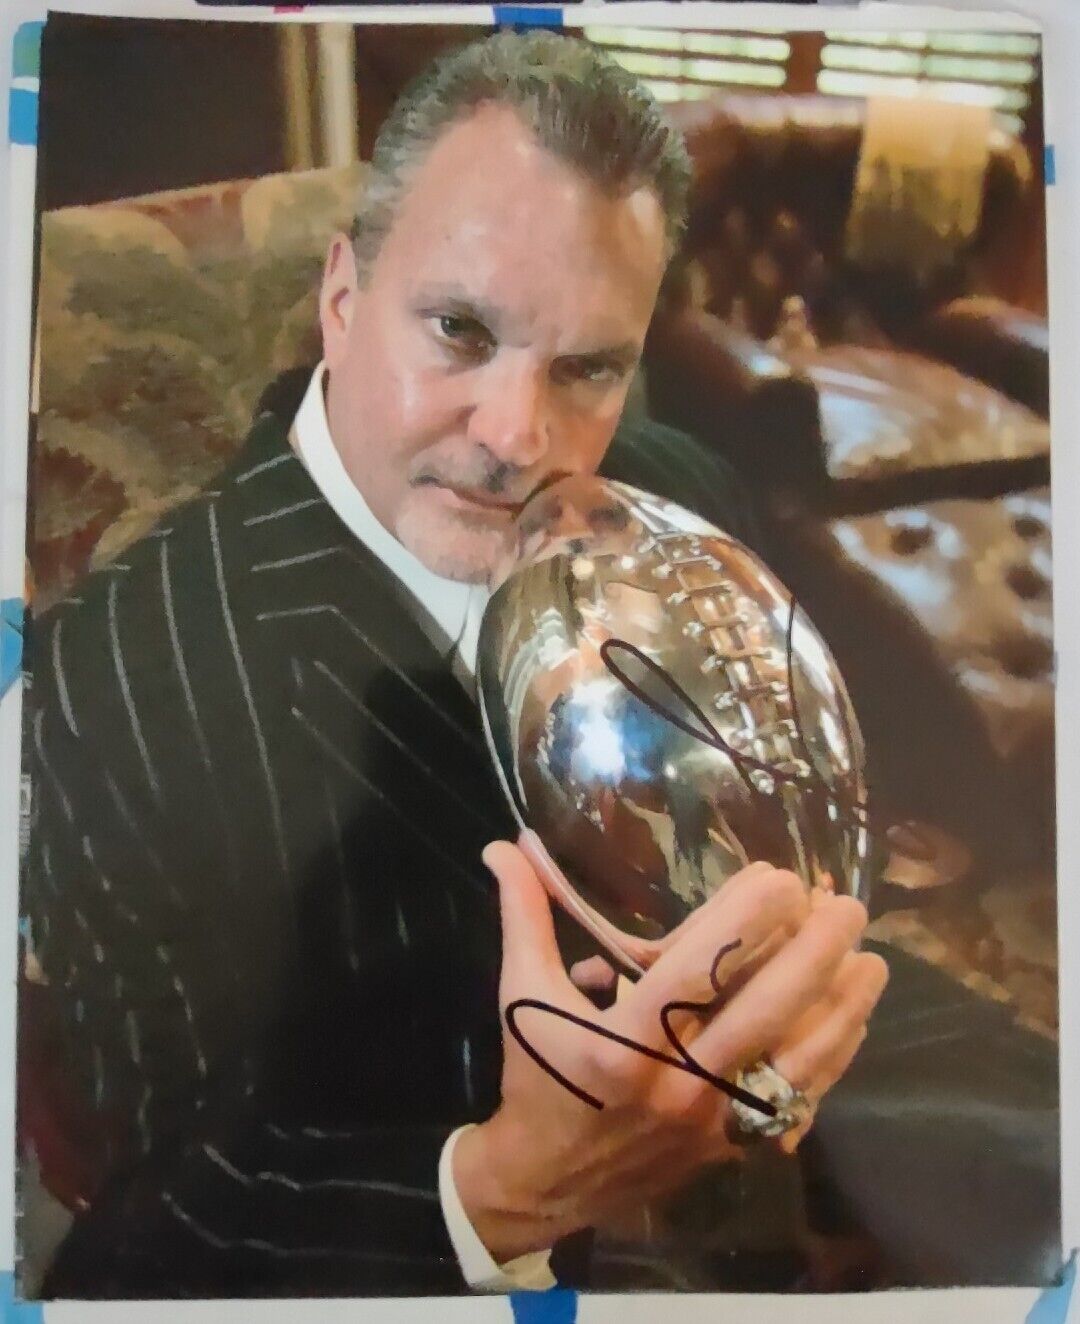 JIM IRSAY INDIANAPOLIS COLTS OWNER SUPER BOWL CHAMP SIGNED